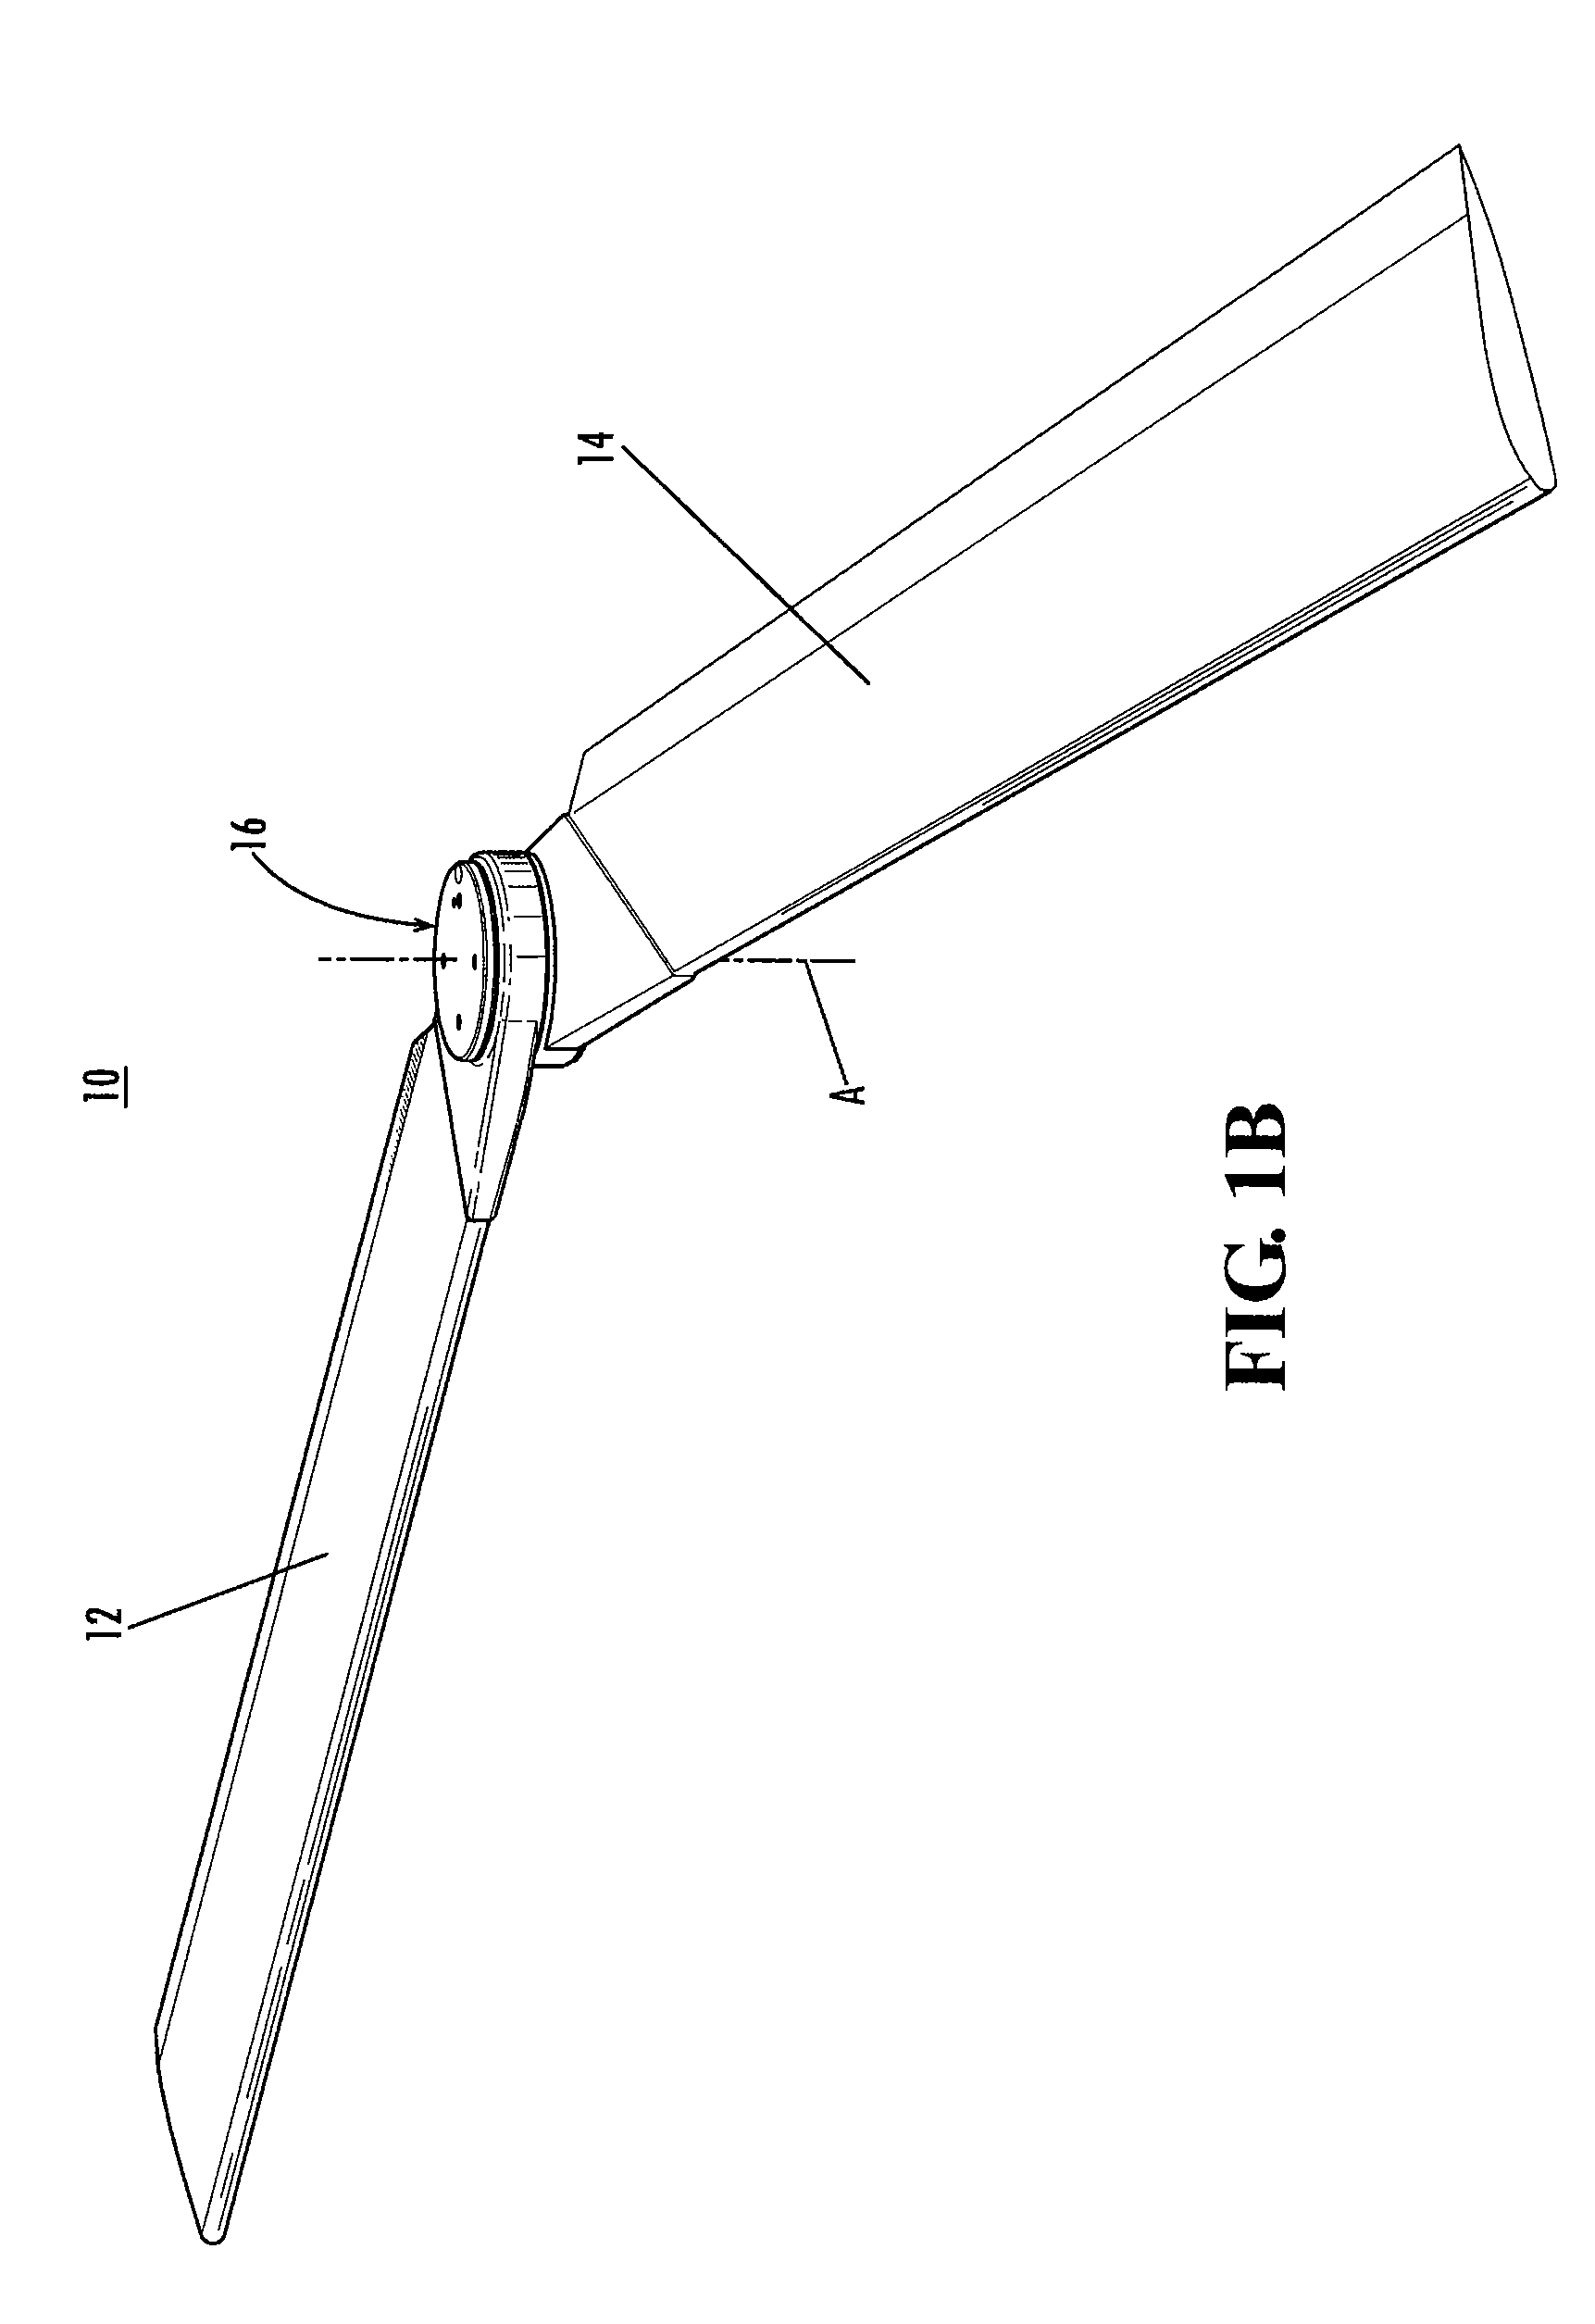 Mechanism for folding, sweeping, and locking vehicle wings about a single pivot